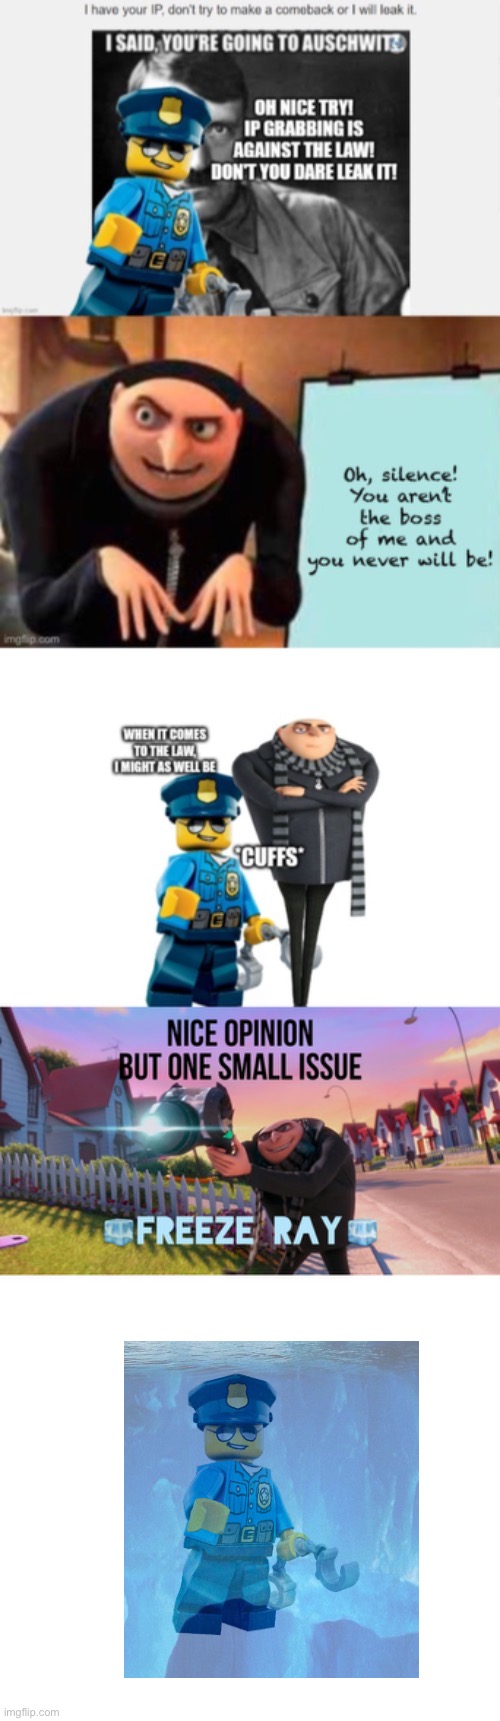 You forgot that Gru has a freeze ray | image tagged in nice opinion but one small issue freeze ray | made w/ Imgflip meme maker